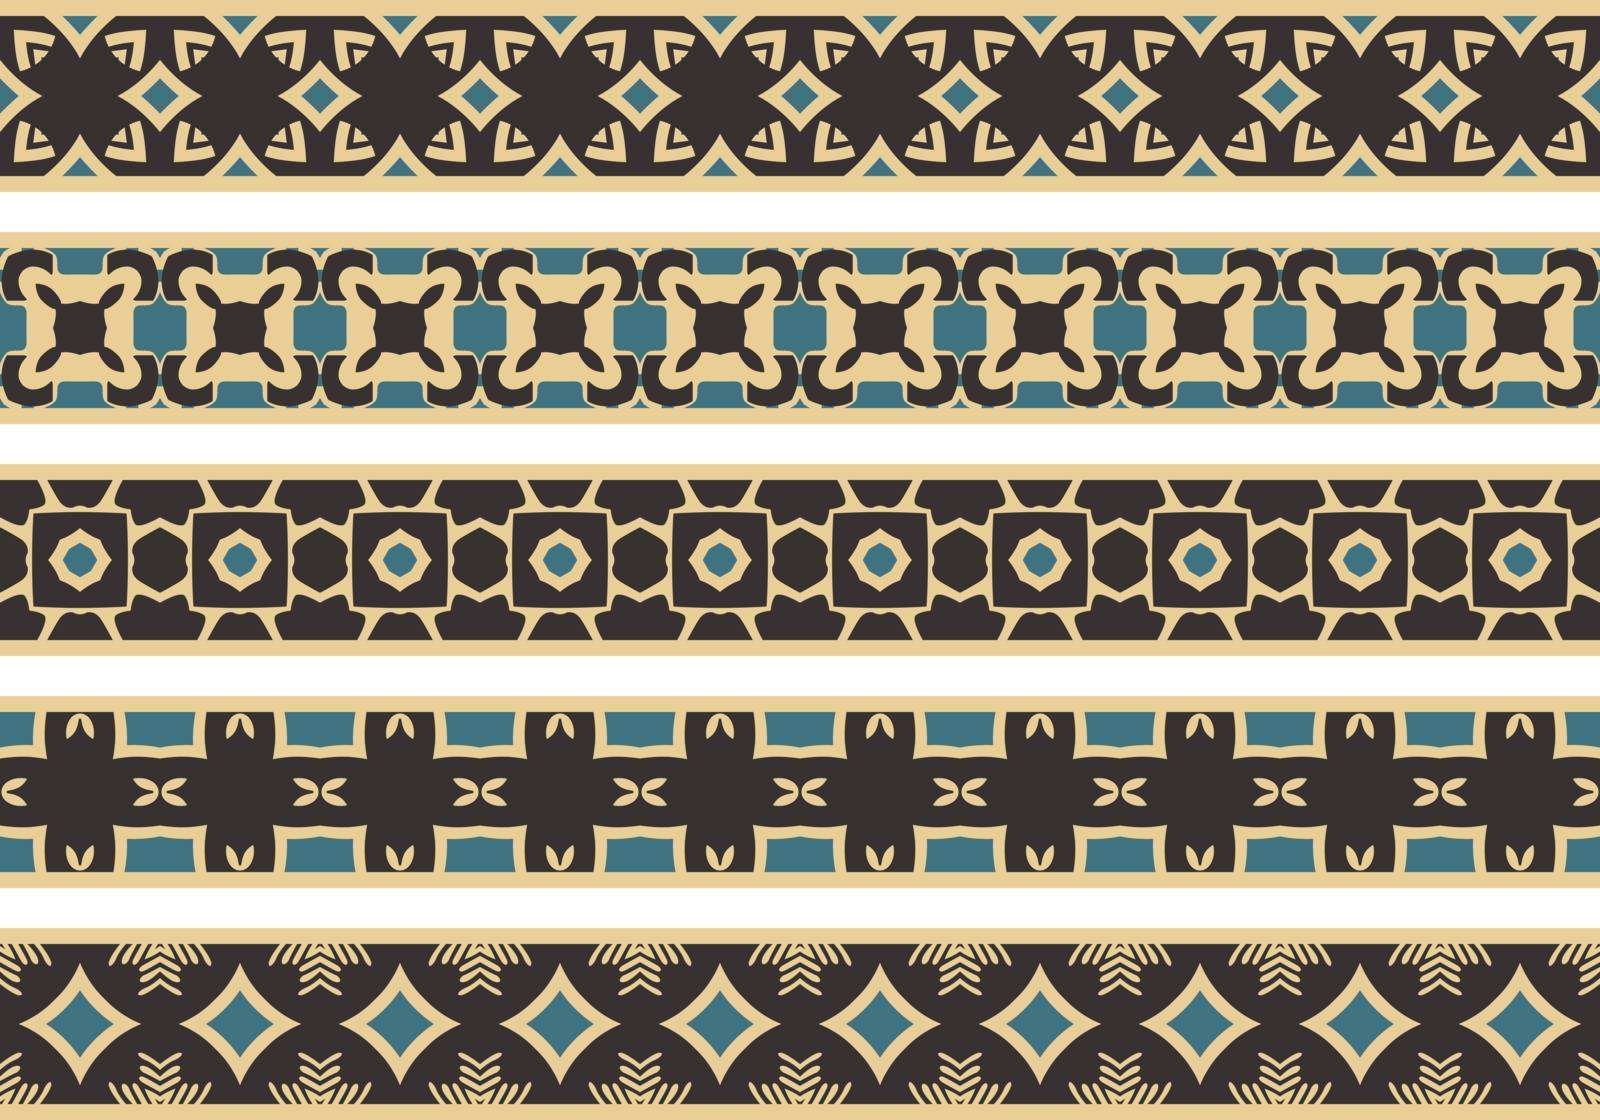 Set of five illustrated decorative borders made of abstract elements in beige, blue and black